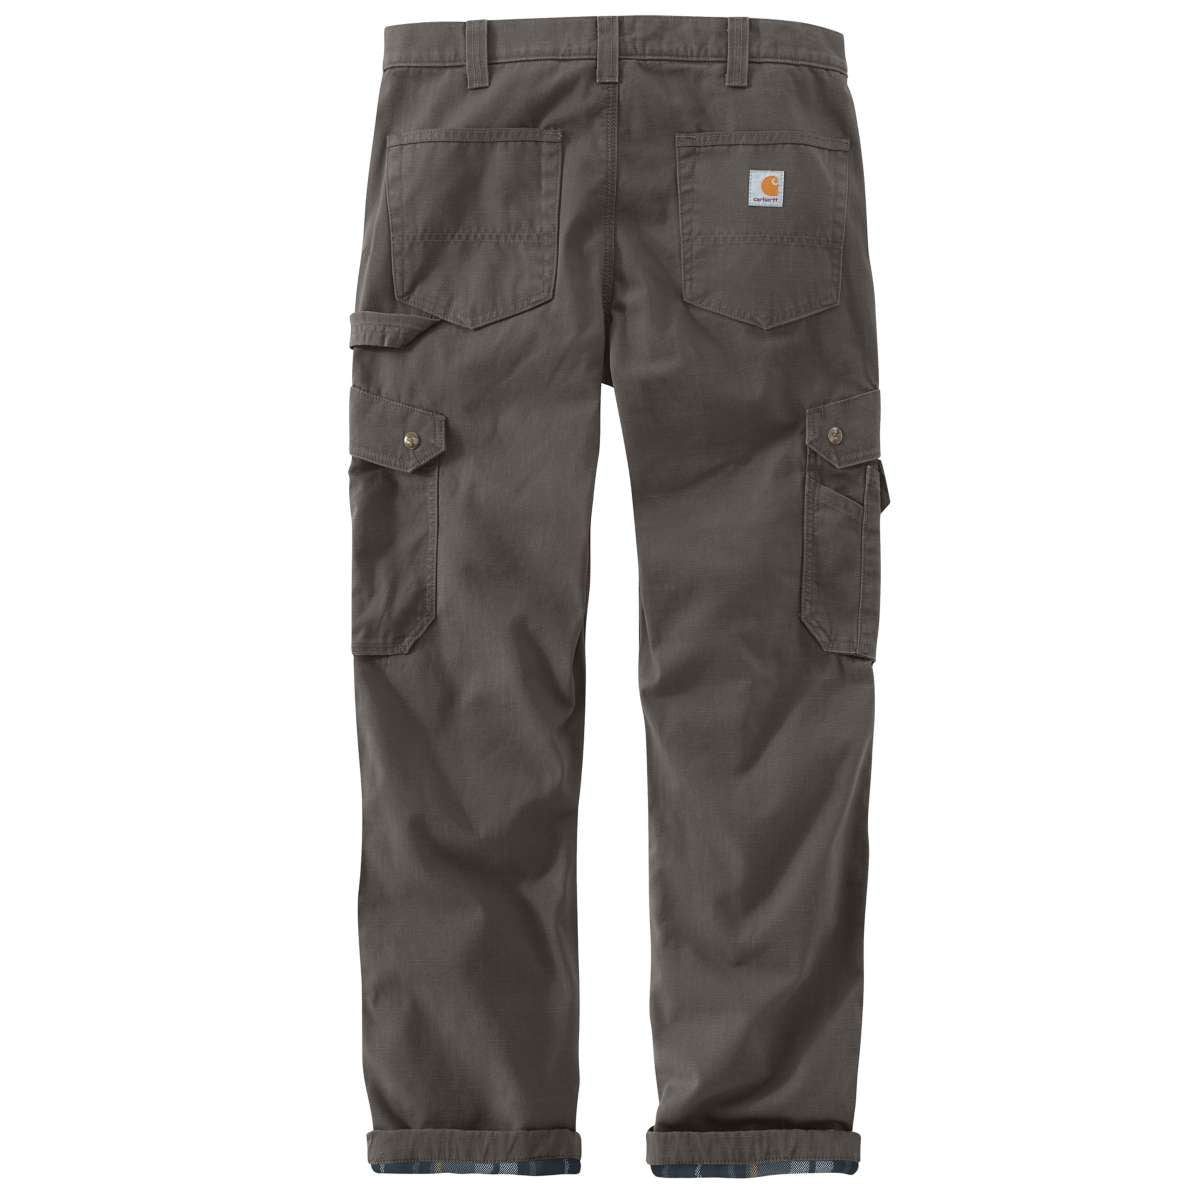 102287 - Carhartt Flannel Lined Ripstop Relaxed Fit Cargo Pant